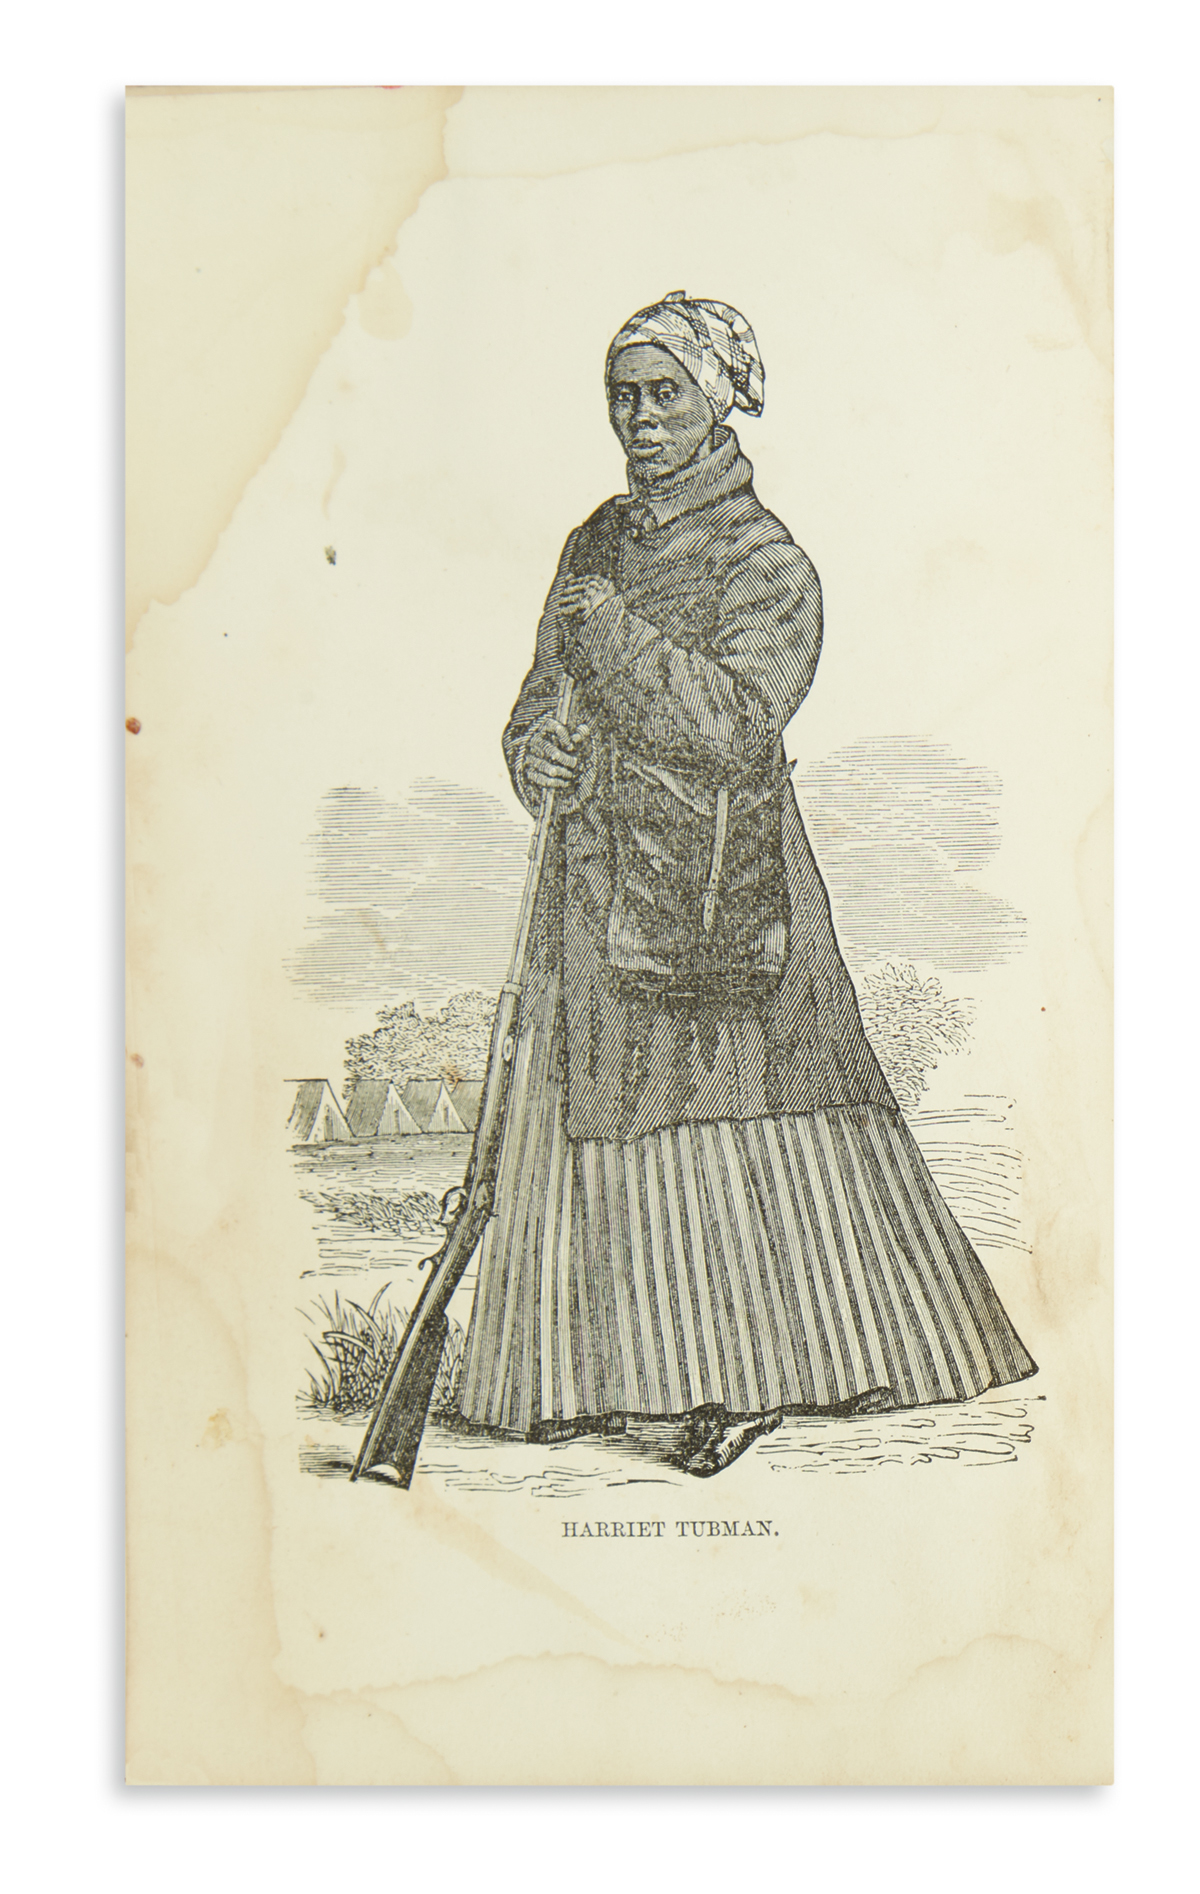 (SLAVERY AND ABOLITION.) Bradford, Sarah H. Scenes in the Life of Harriet Tubman.